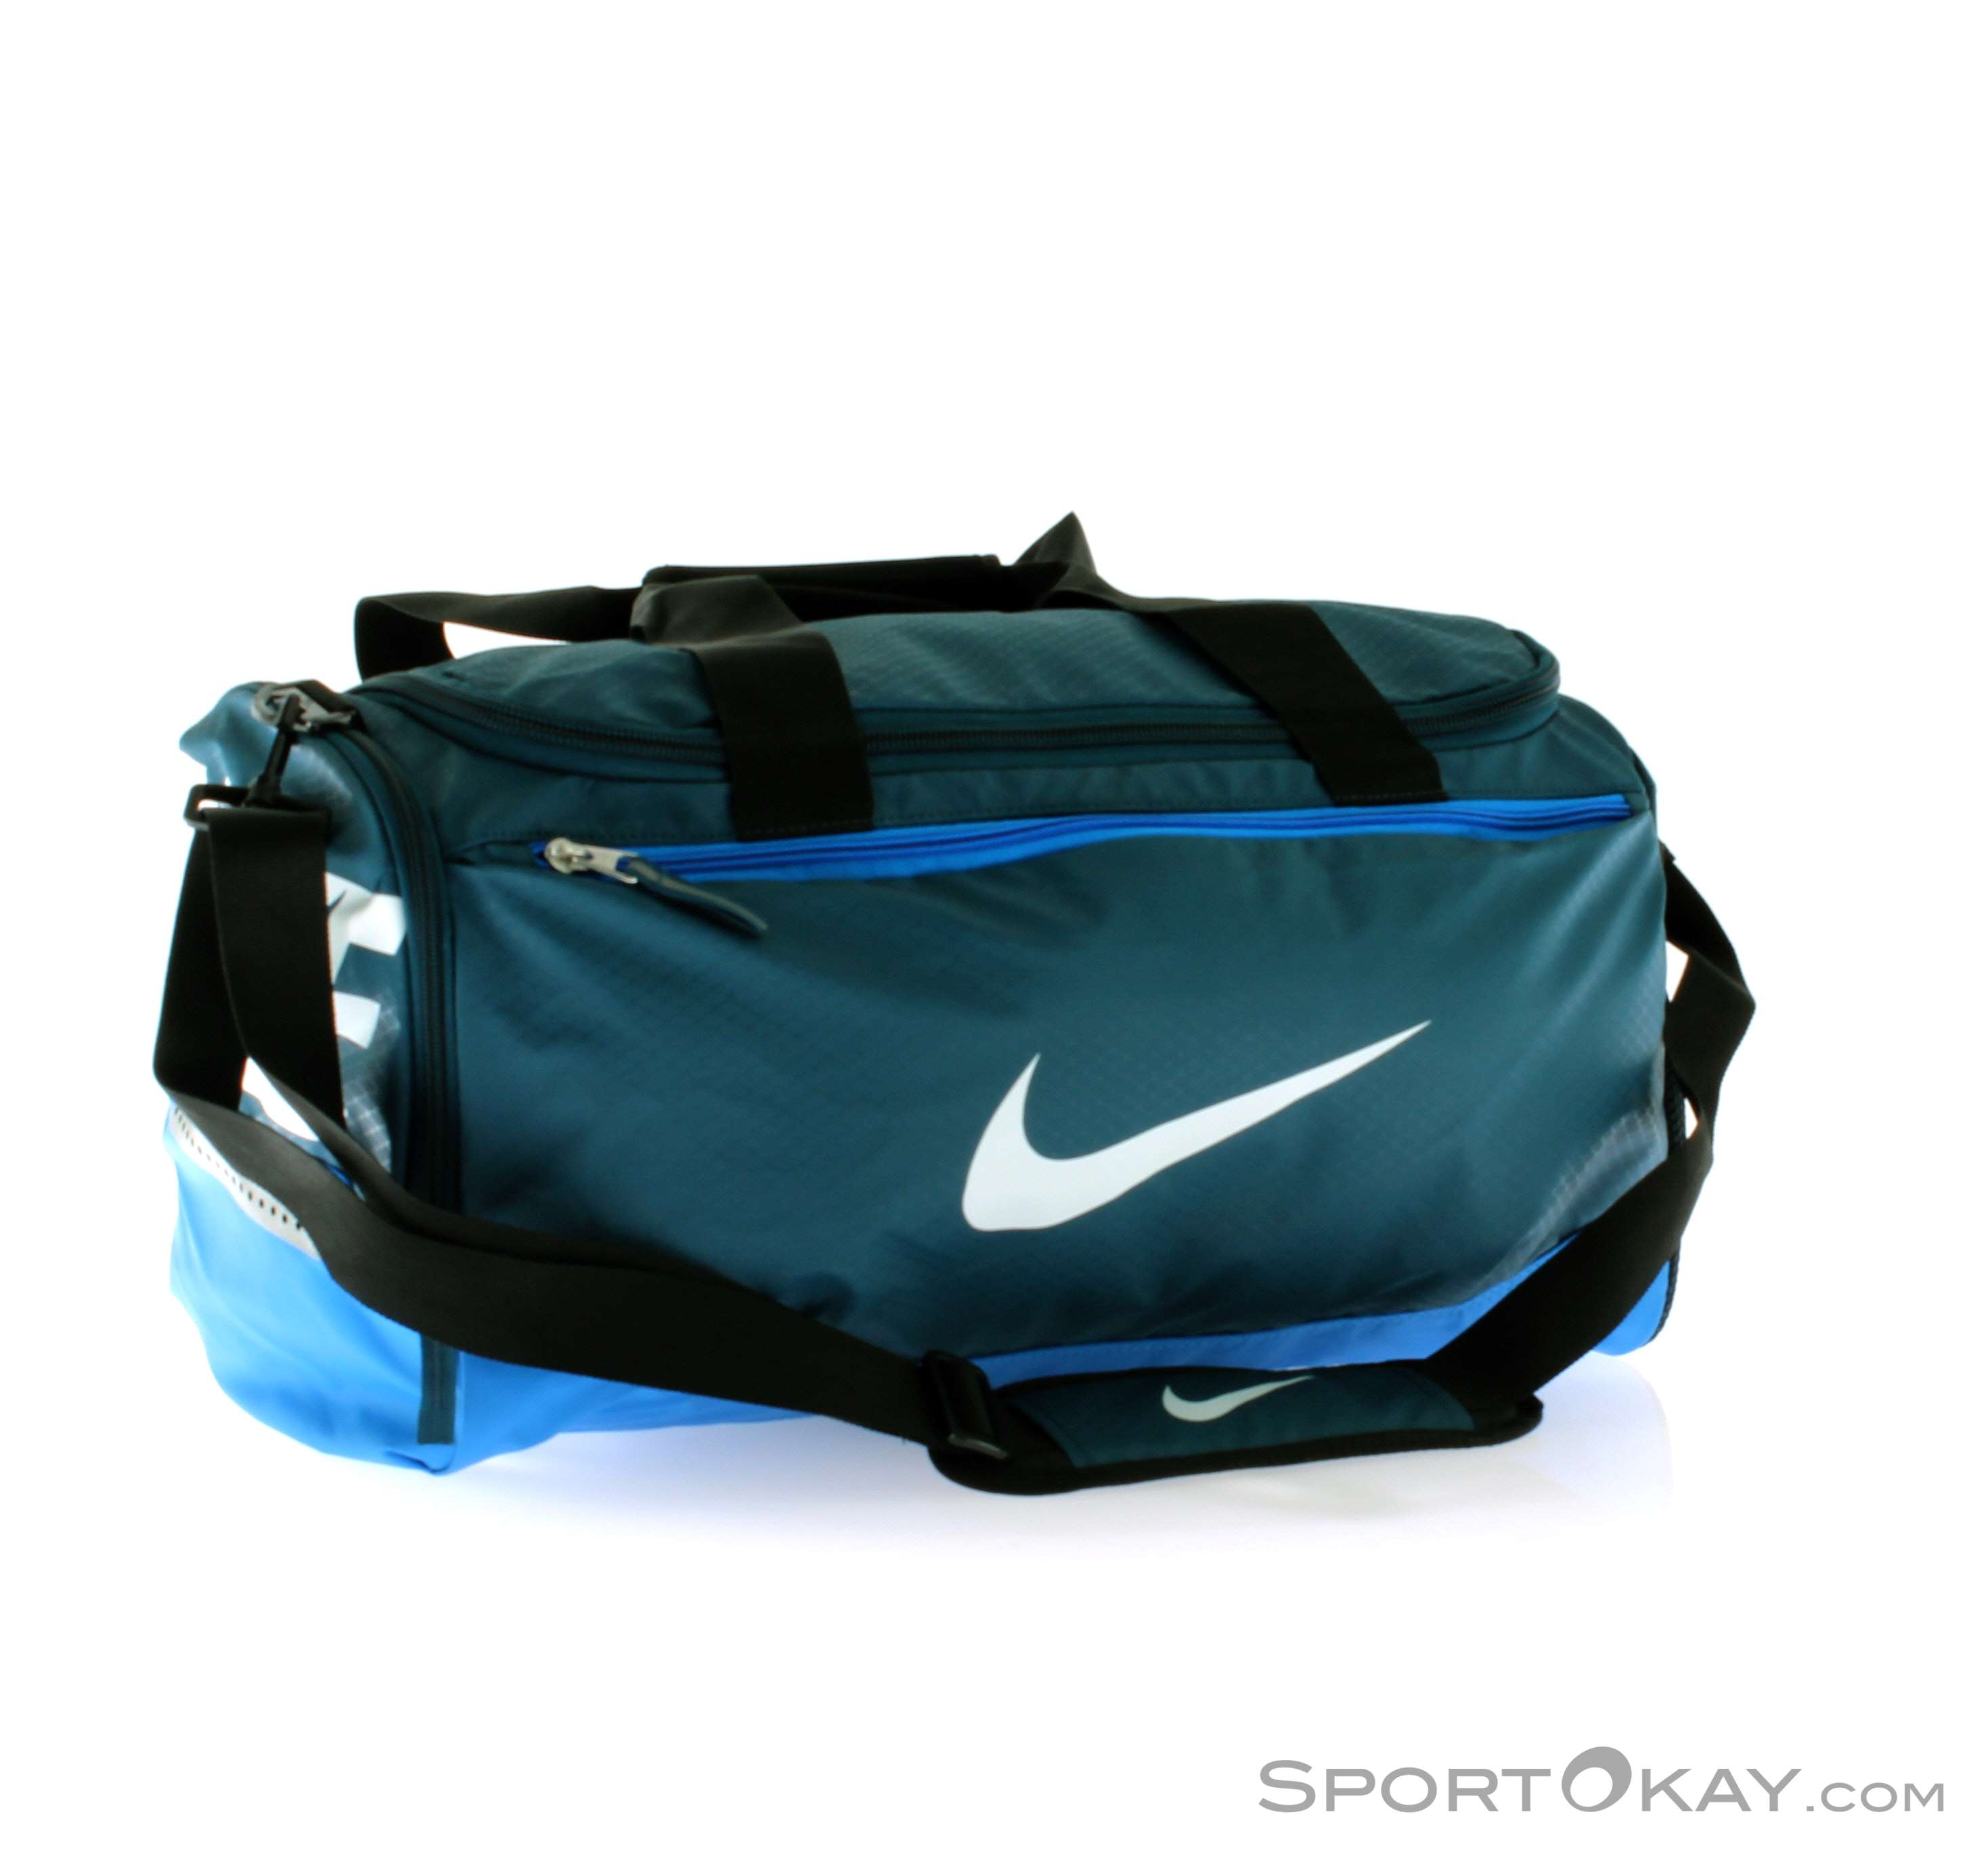 Nike Team Sporttasche - Bags & Backpacks Fitness Accessory - Fitness - All